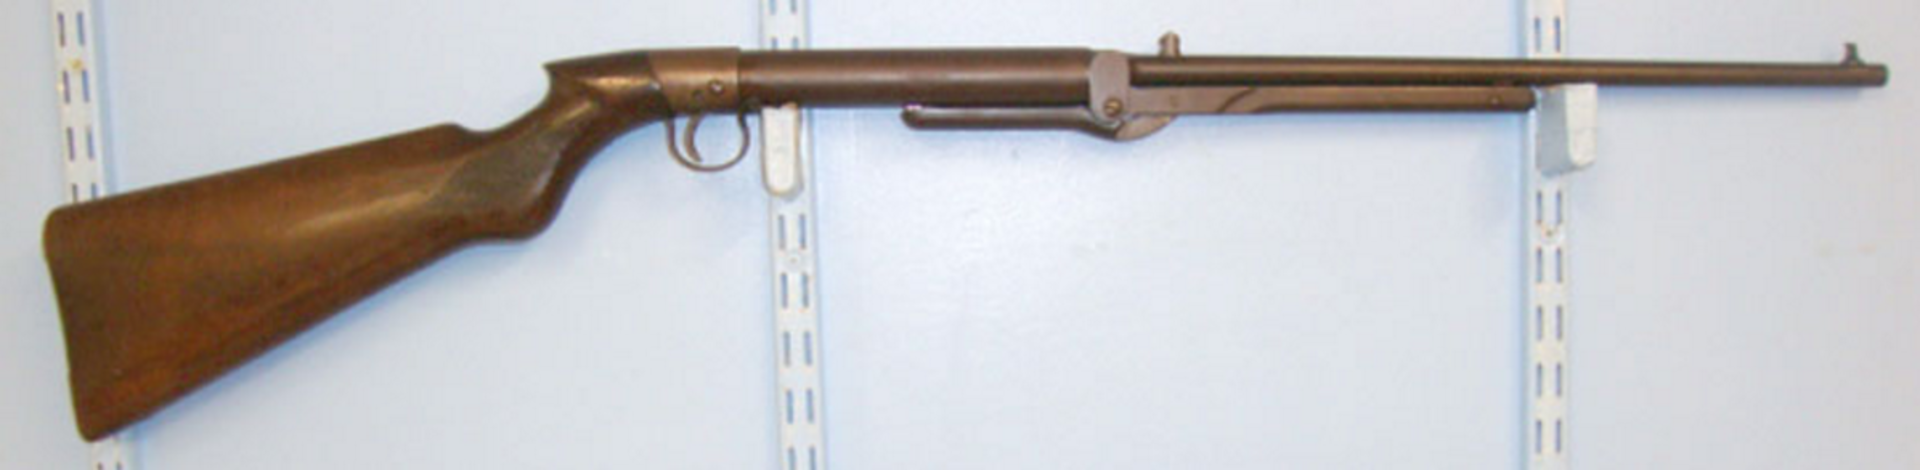 1923 to 1924 B.S.A. Standard No. 1 Model .177 Calibre Under Lever Air Rifle - Image 3 of 3